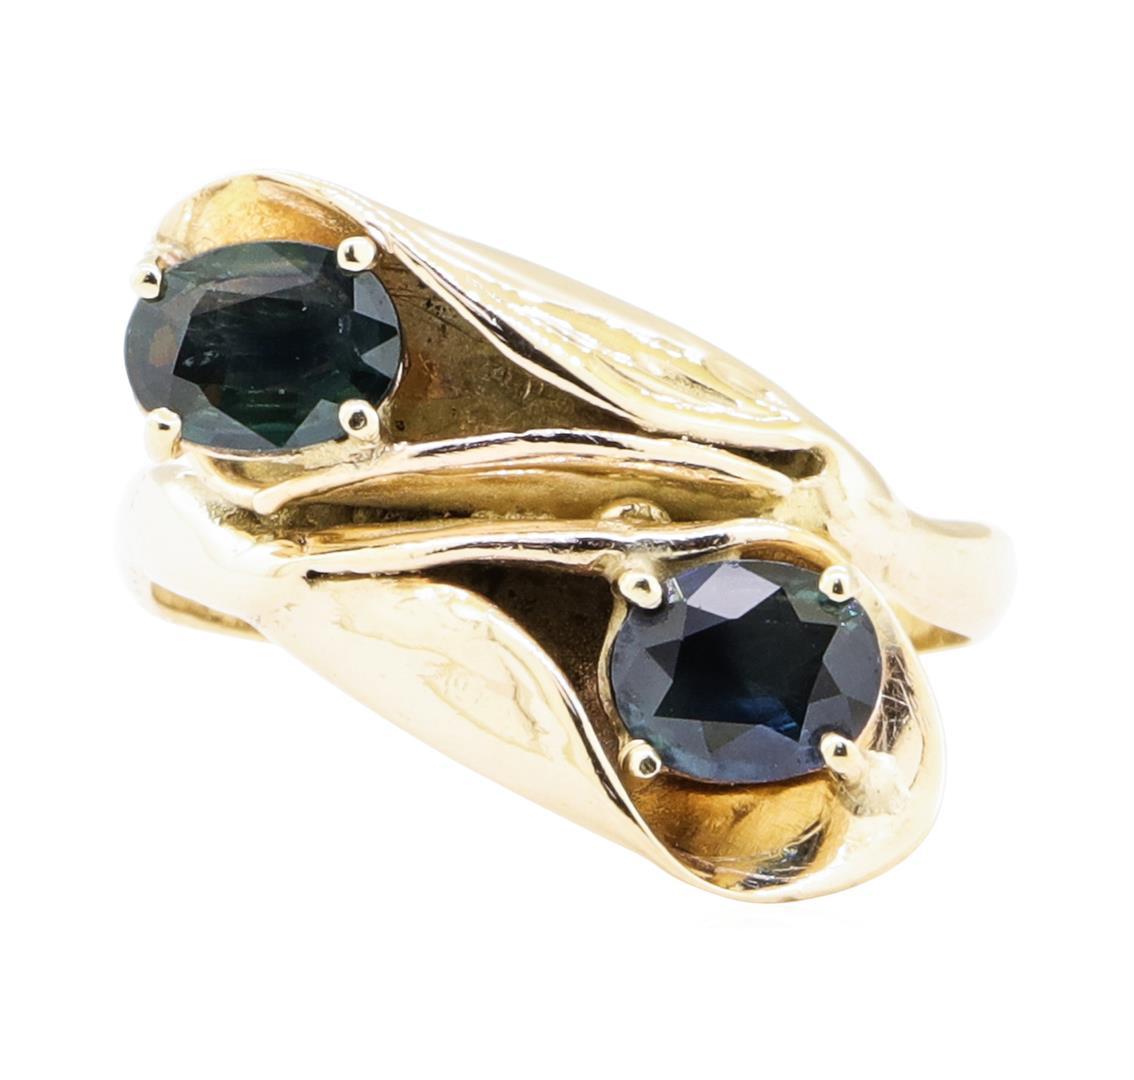 1.80 ctw Sapphire Ring - 14KT Yellow Gold